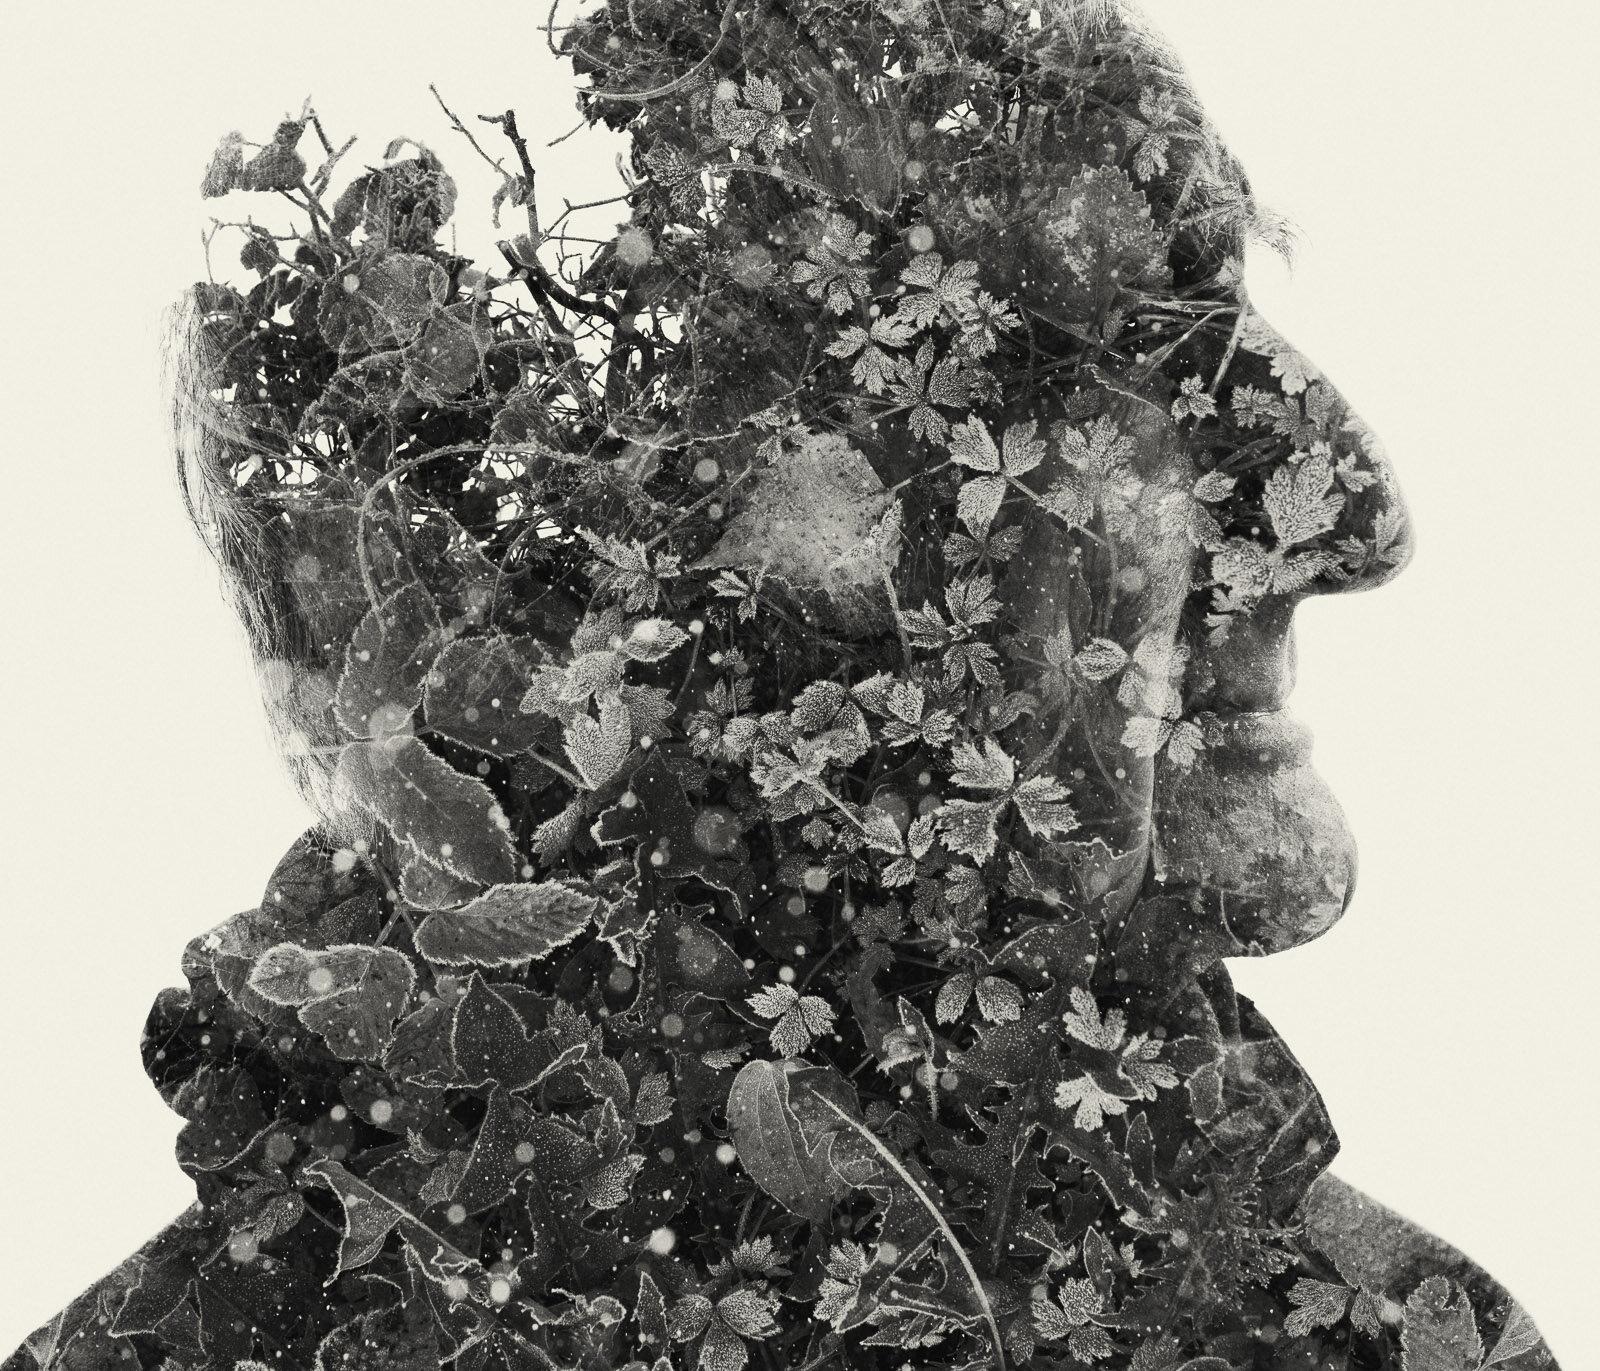 The ancestor - black and white portrait and nature multi exposure photograph